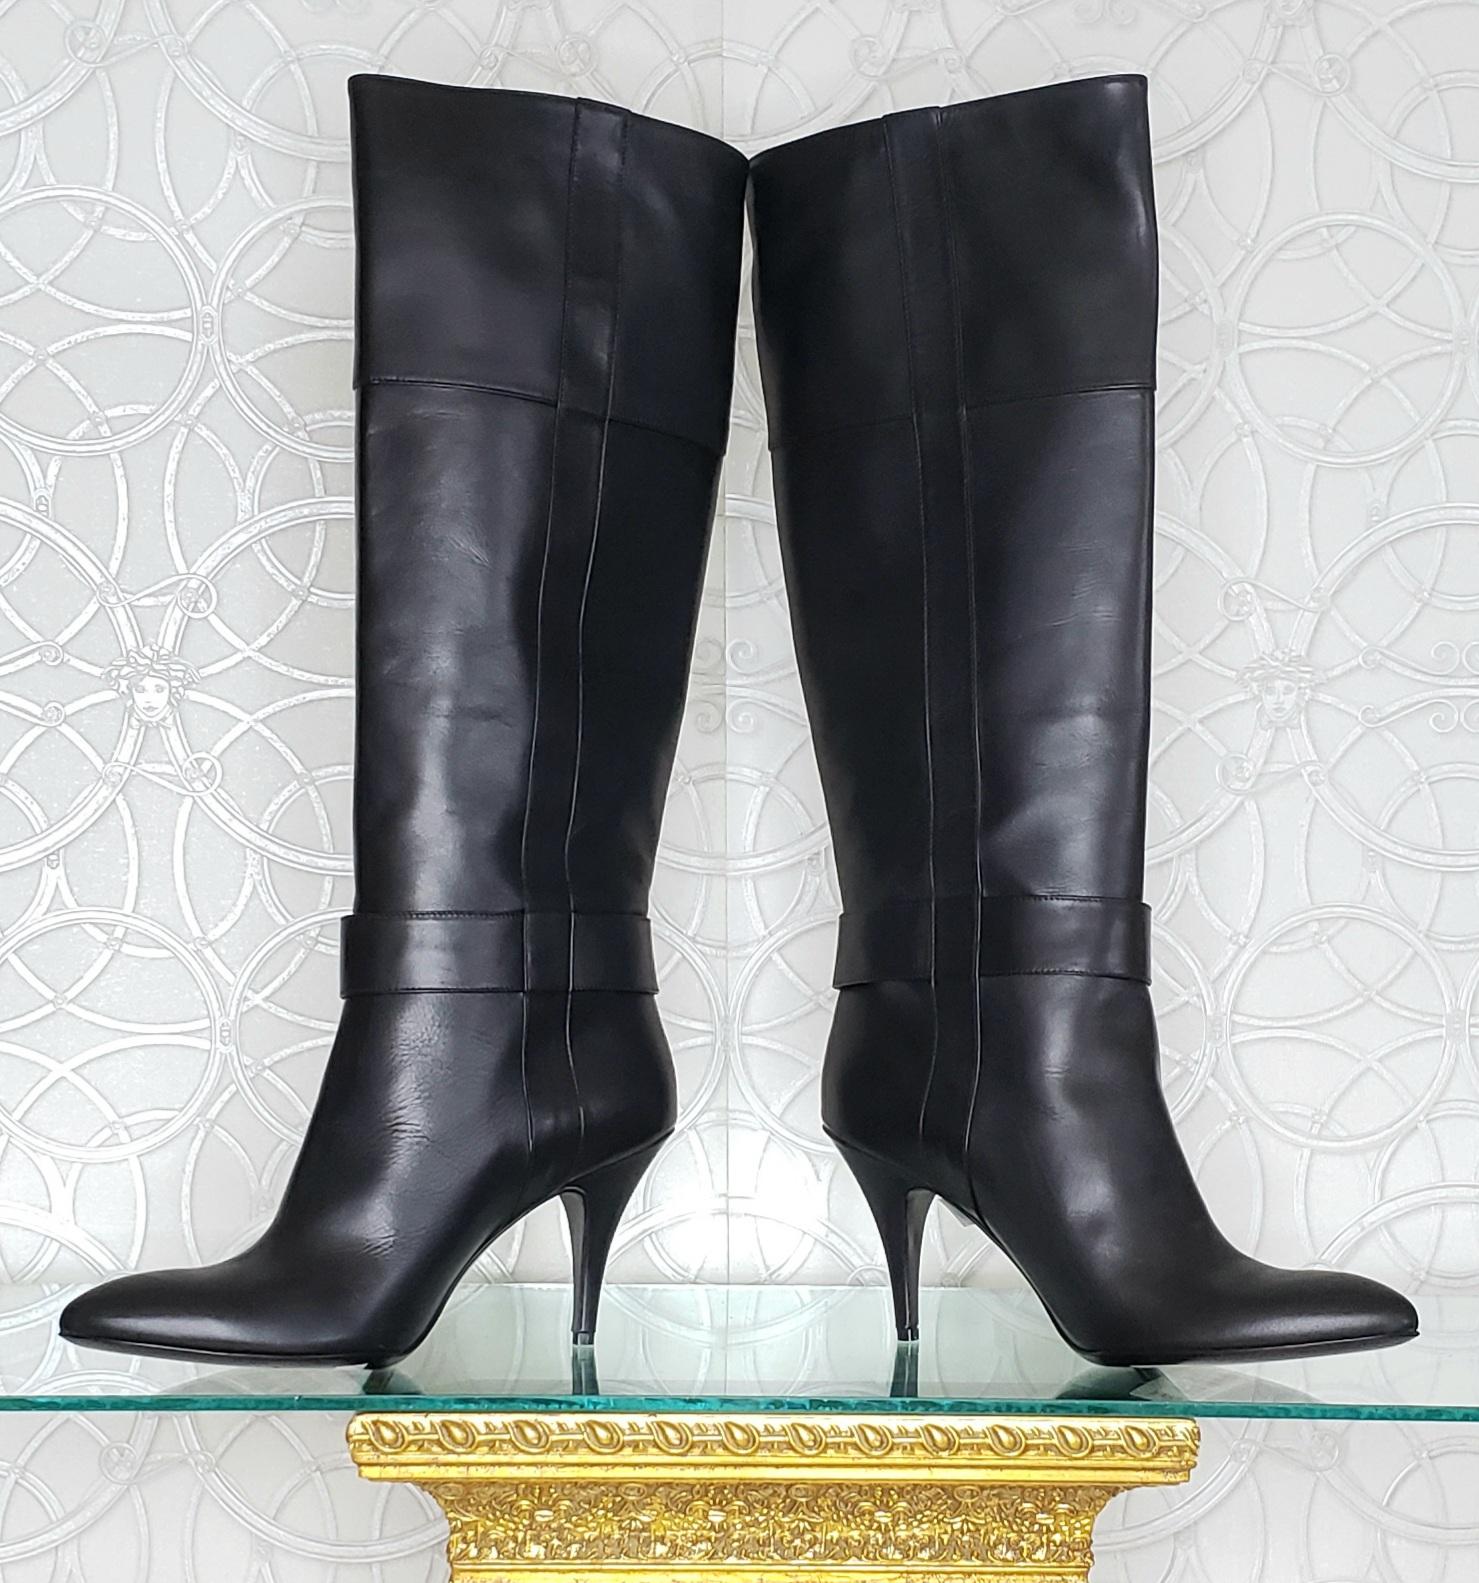 New VERSACE VJC BLACK LEATHER BOOTS 39 - 9 In New Condition For Sale In Montgomery, TX